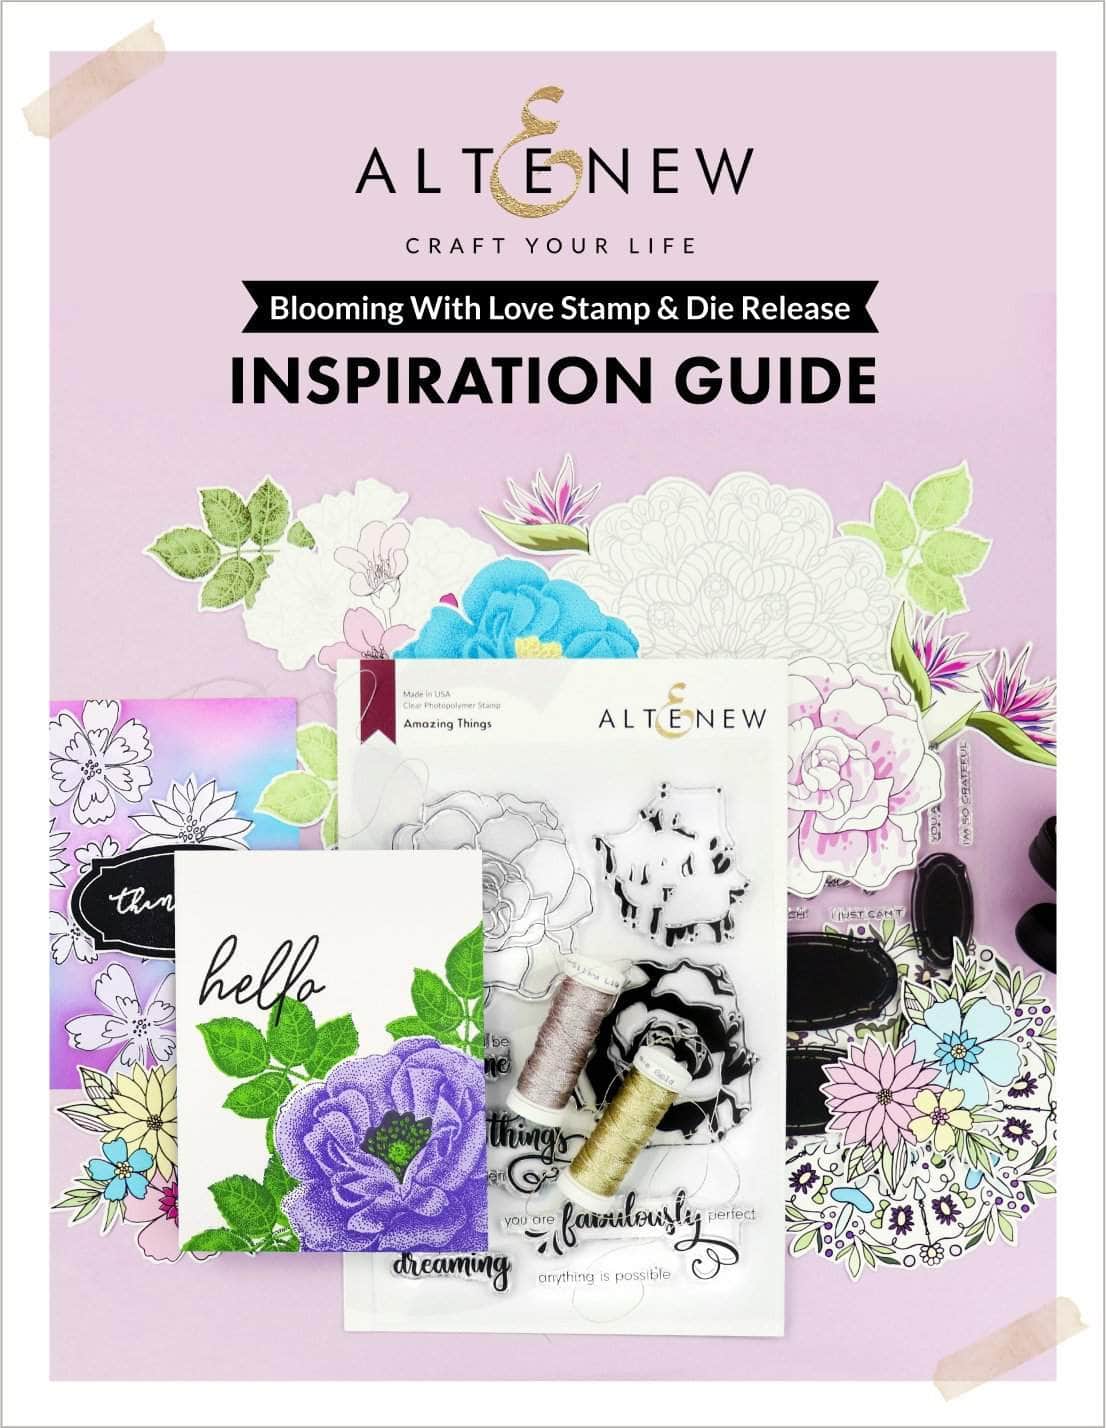 Printed Media Blooming With Love Stamp & Die Release Inspiration Guide